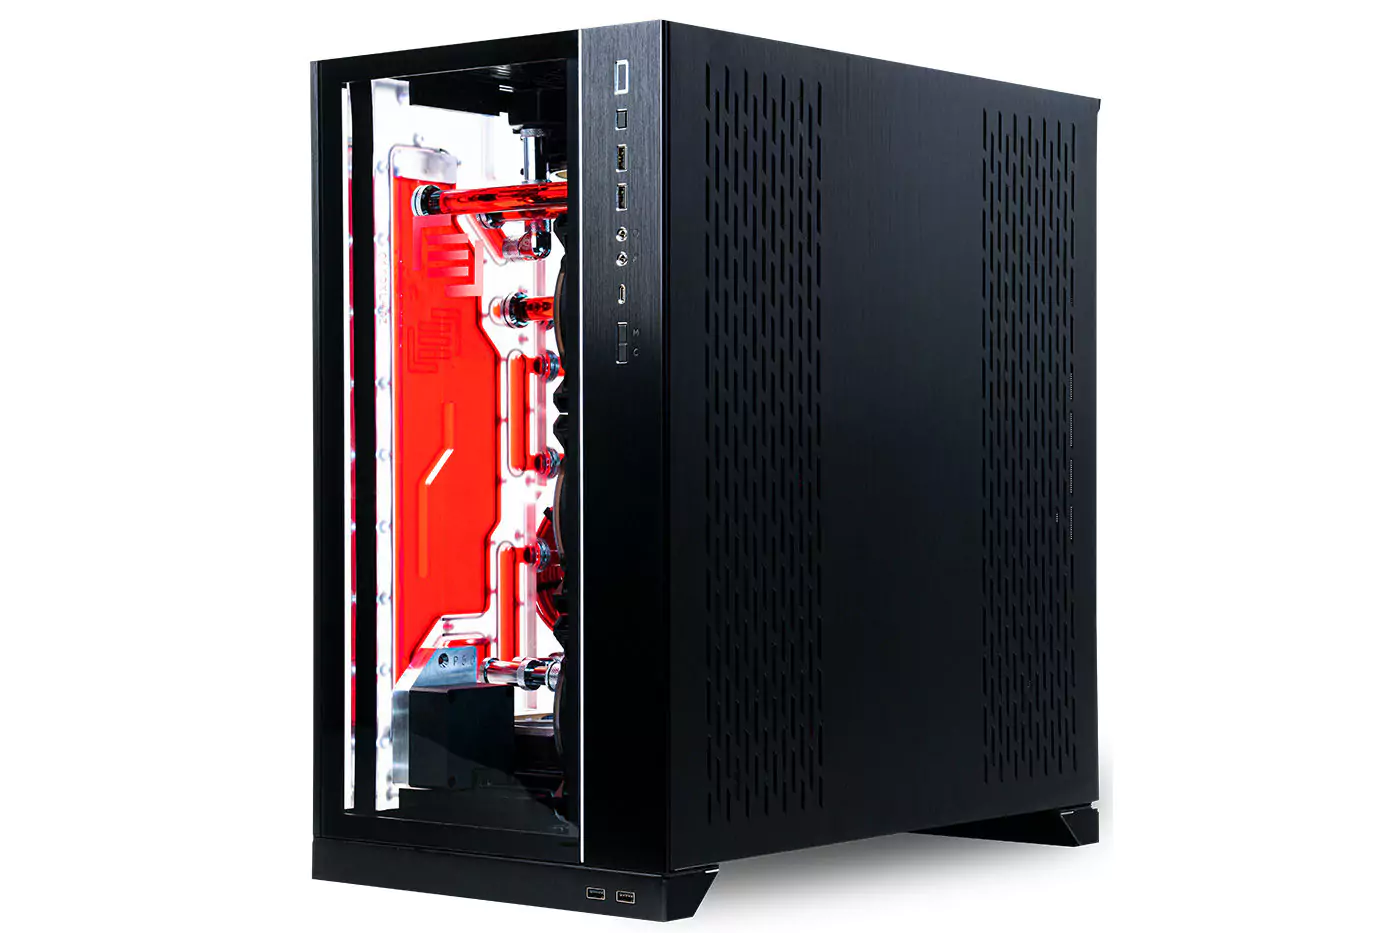 Maingear Spark is a tiny gaming PC for $699 and up - Liliputing